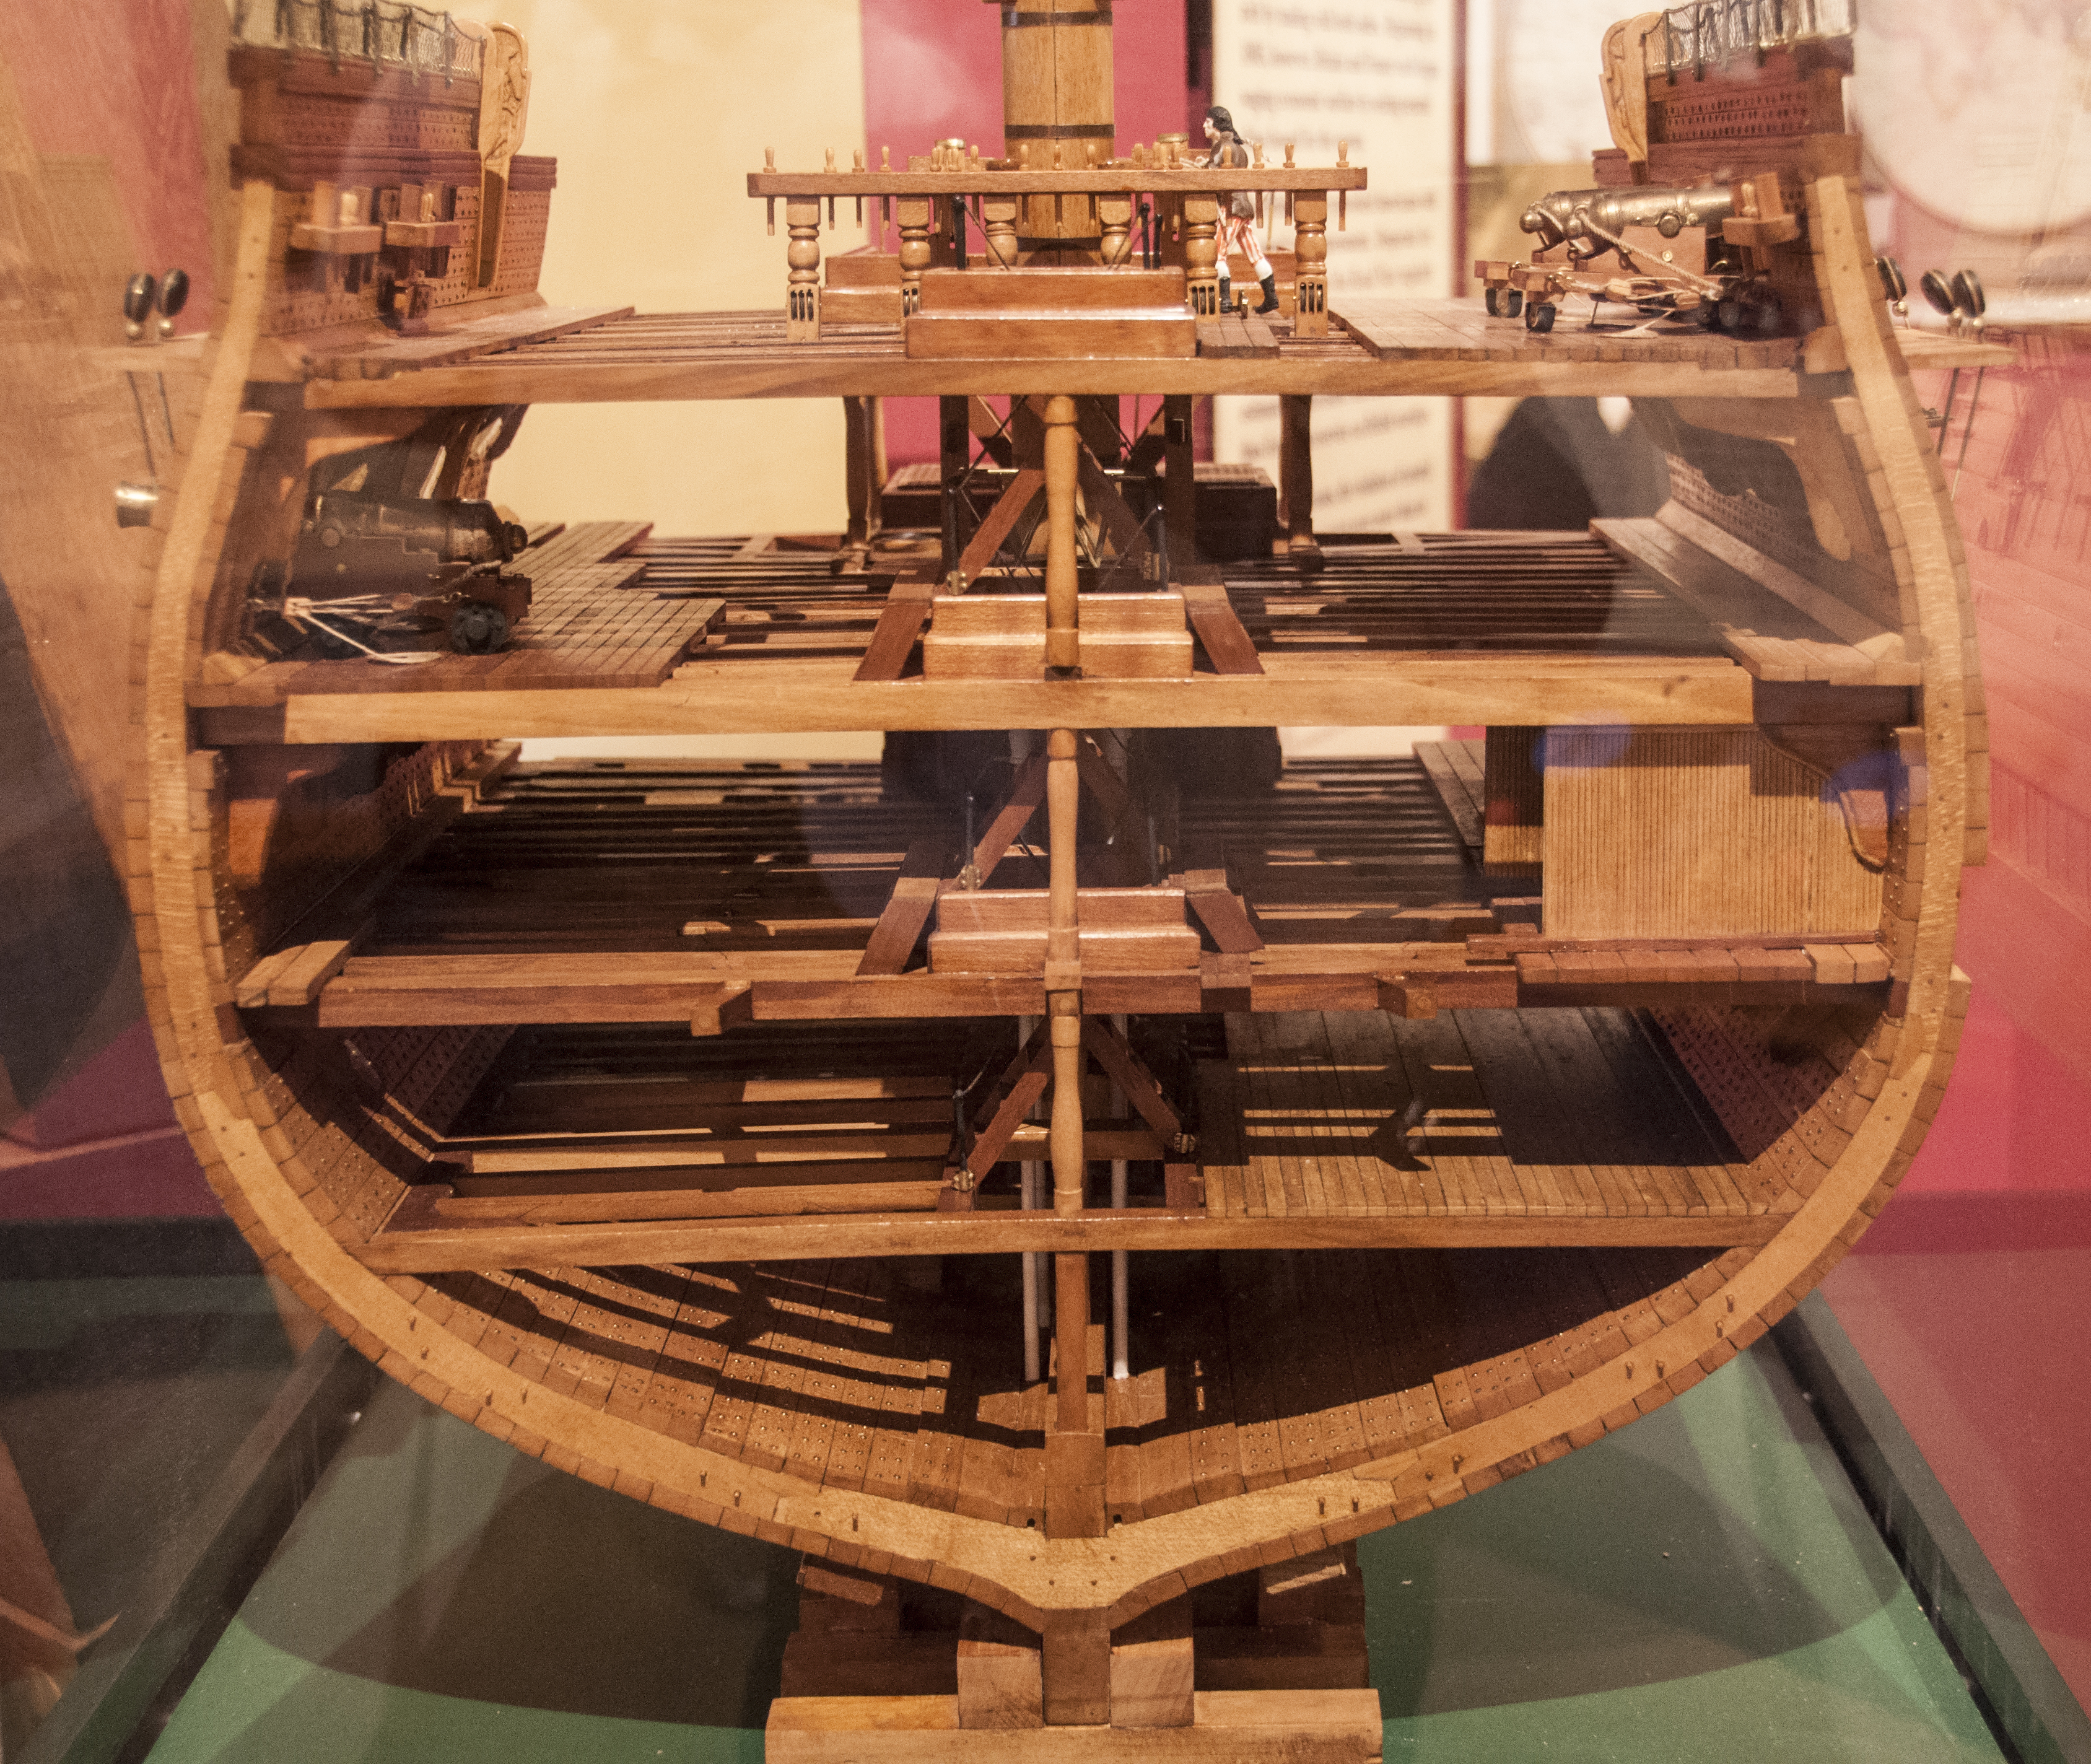 uss constitution cross section